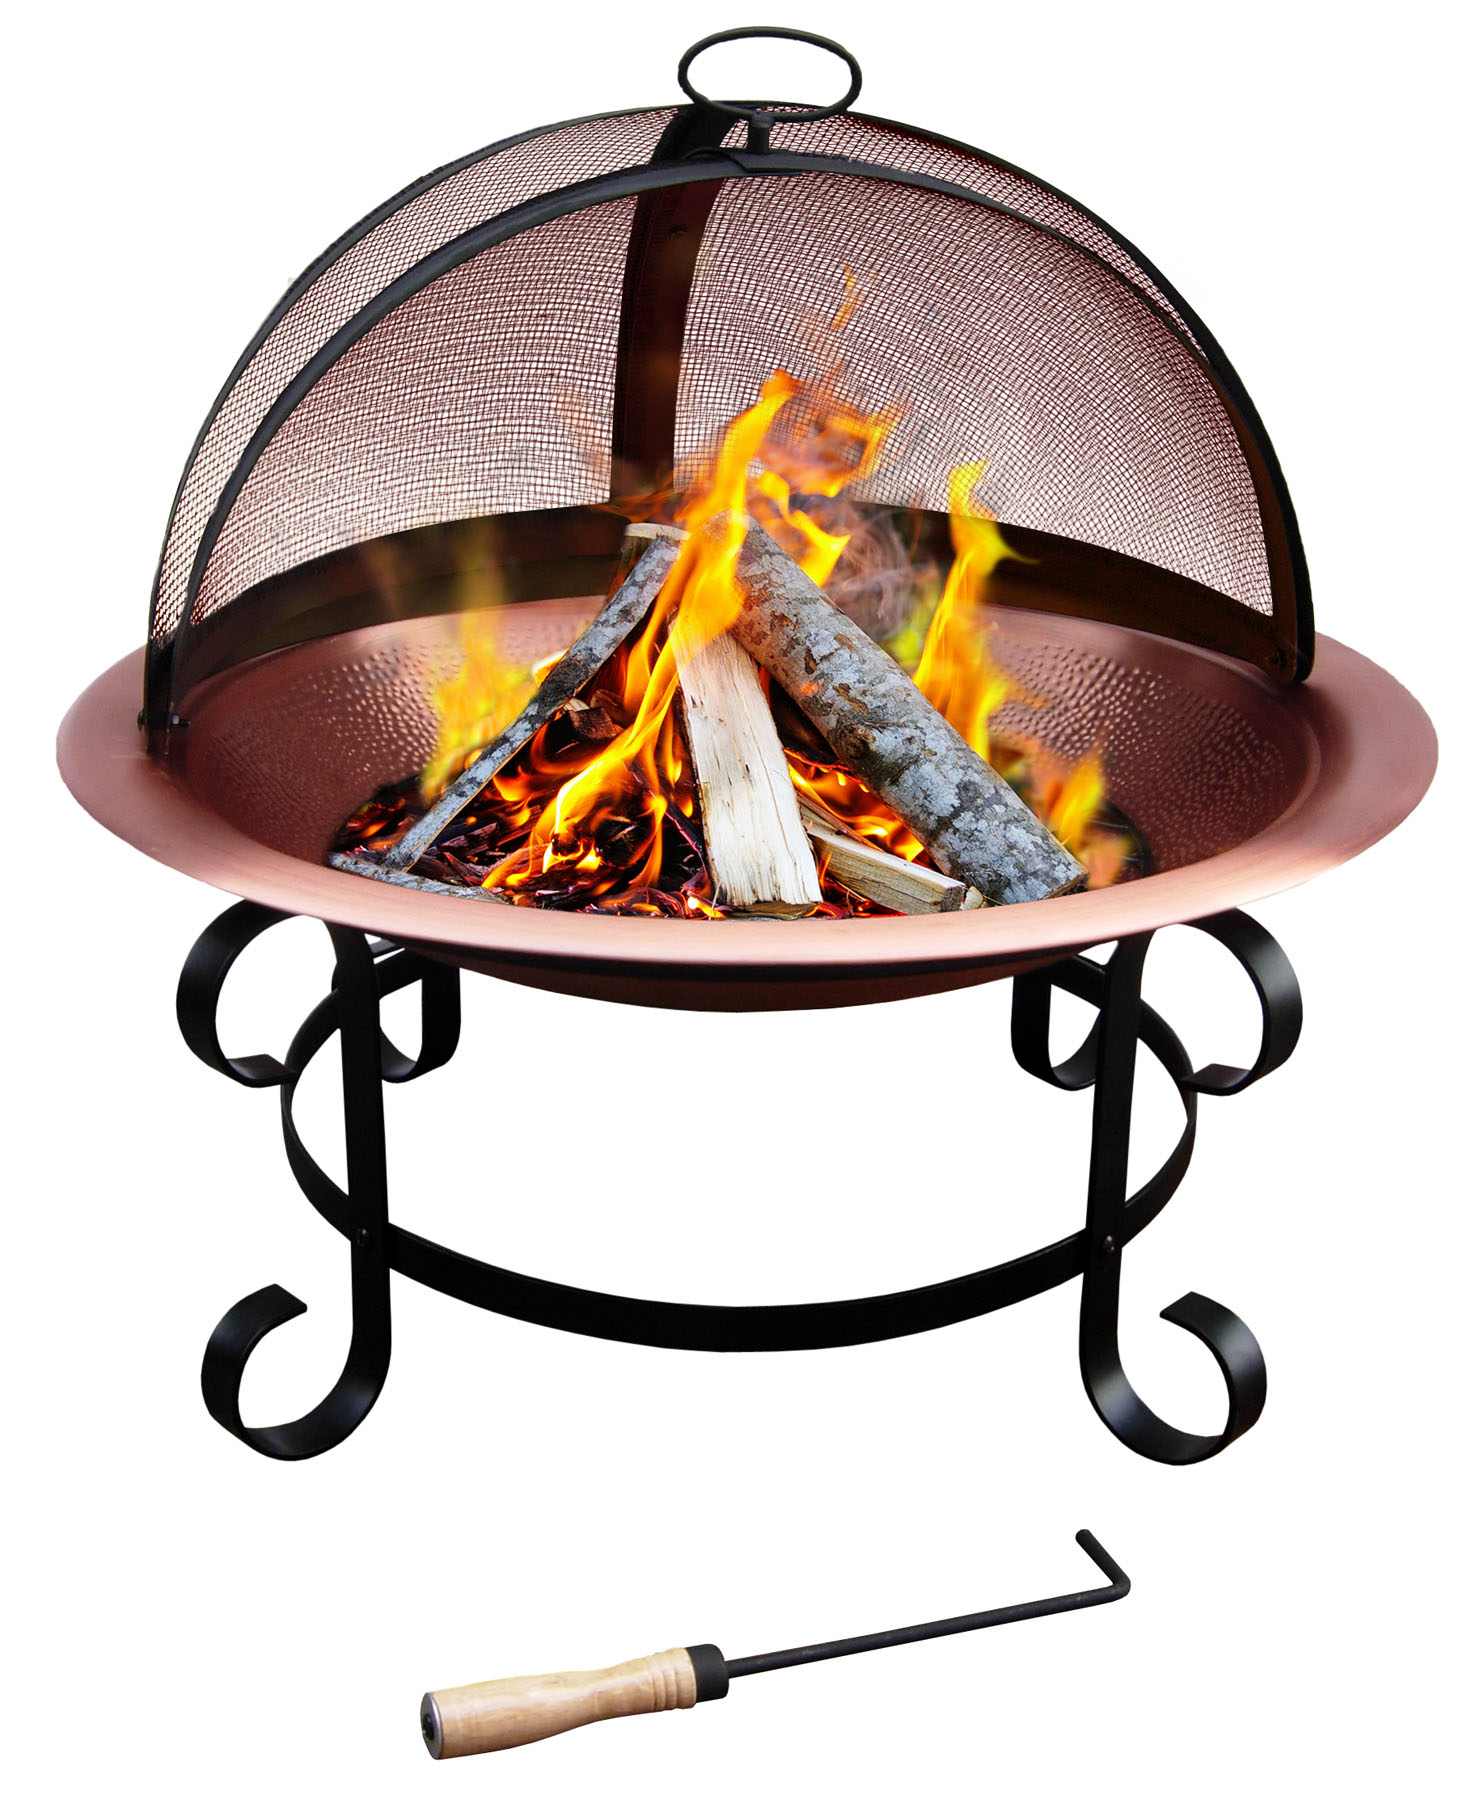 fire ring clipart - photo #34